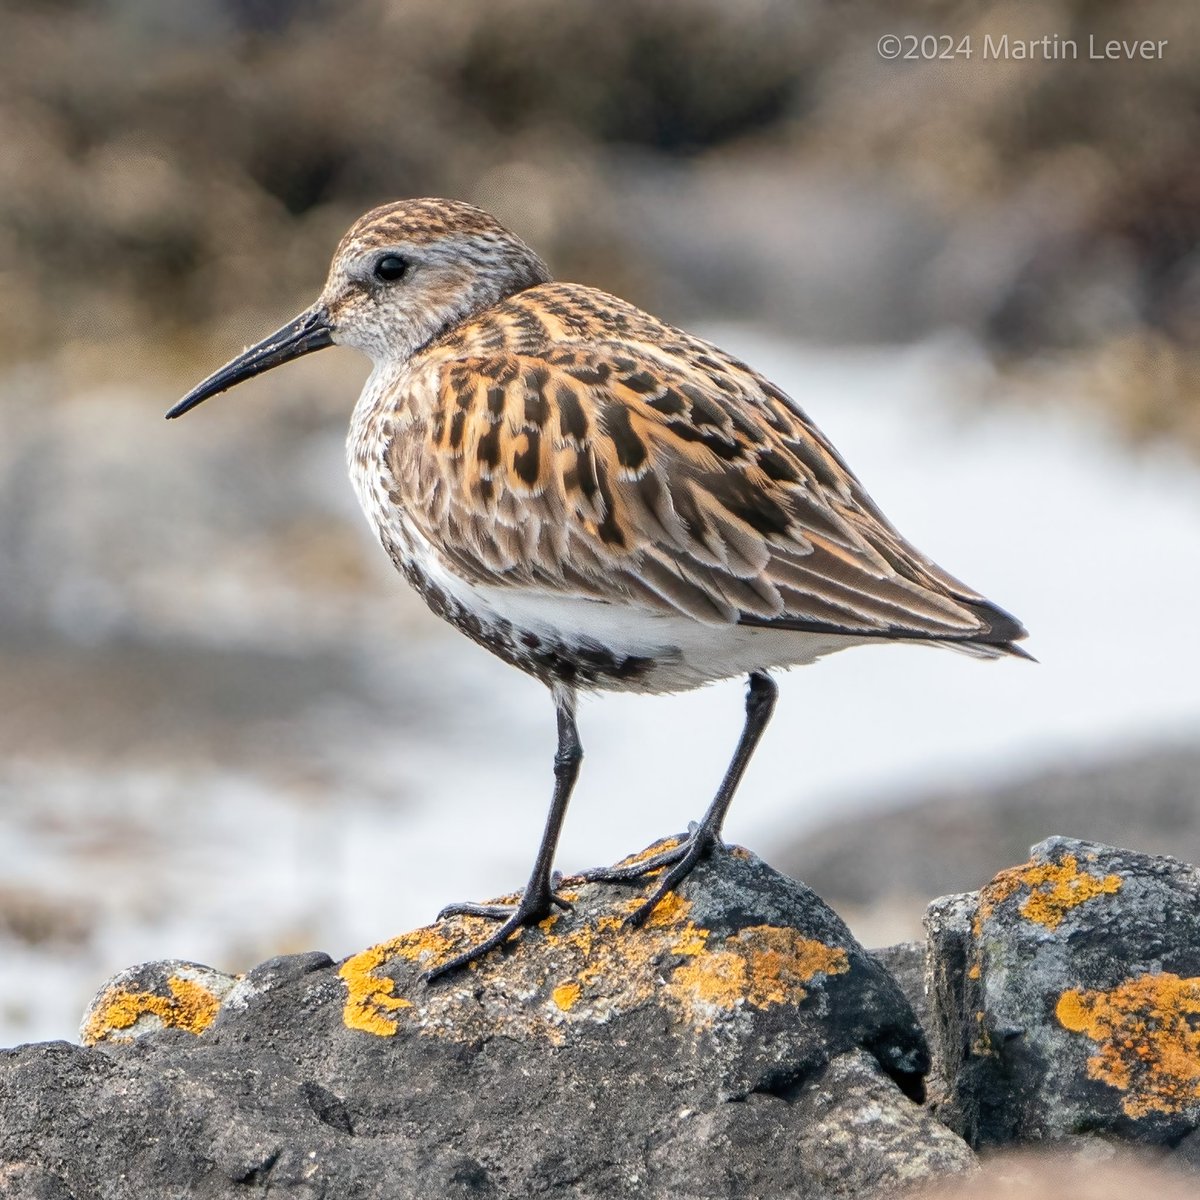 Had a magical 30-min encounter with a group of #Dunlins on the shore and salt marsh at St Ninian’s Bay, #Bute today.